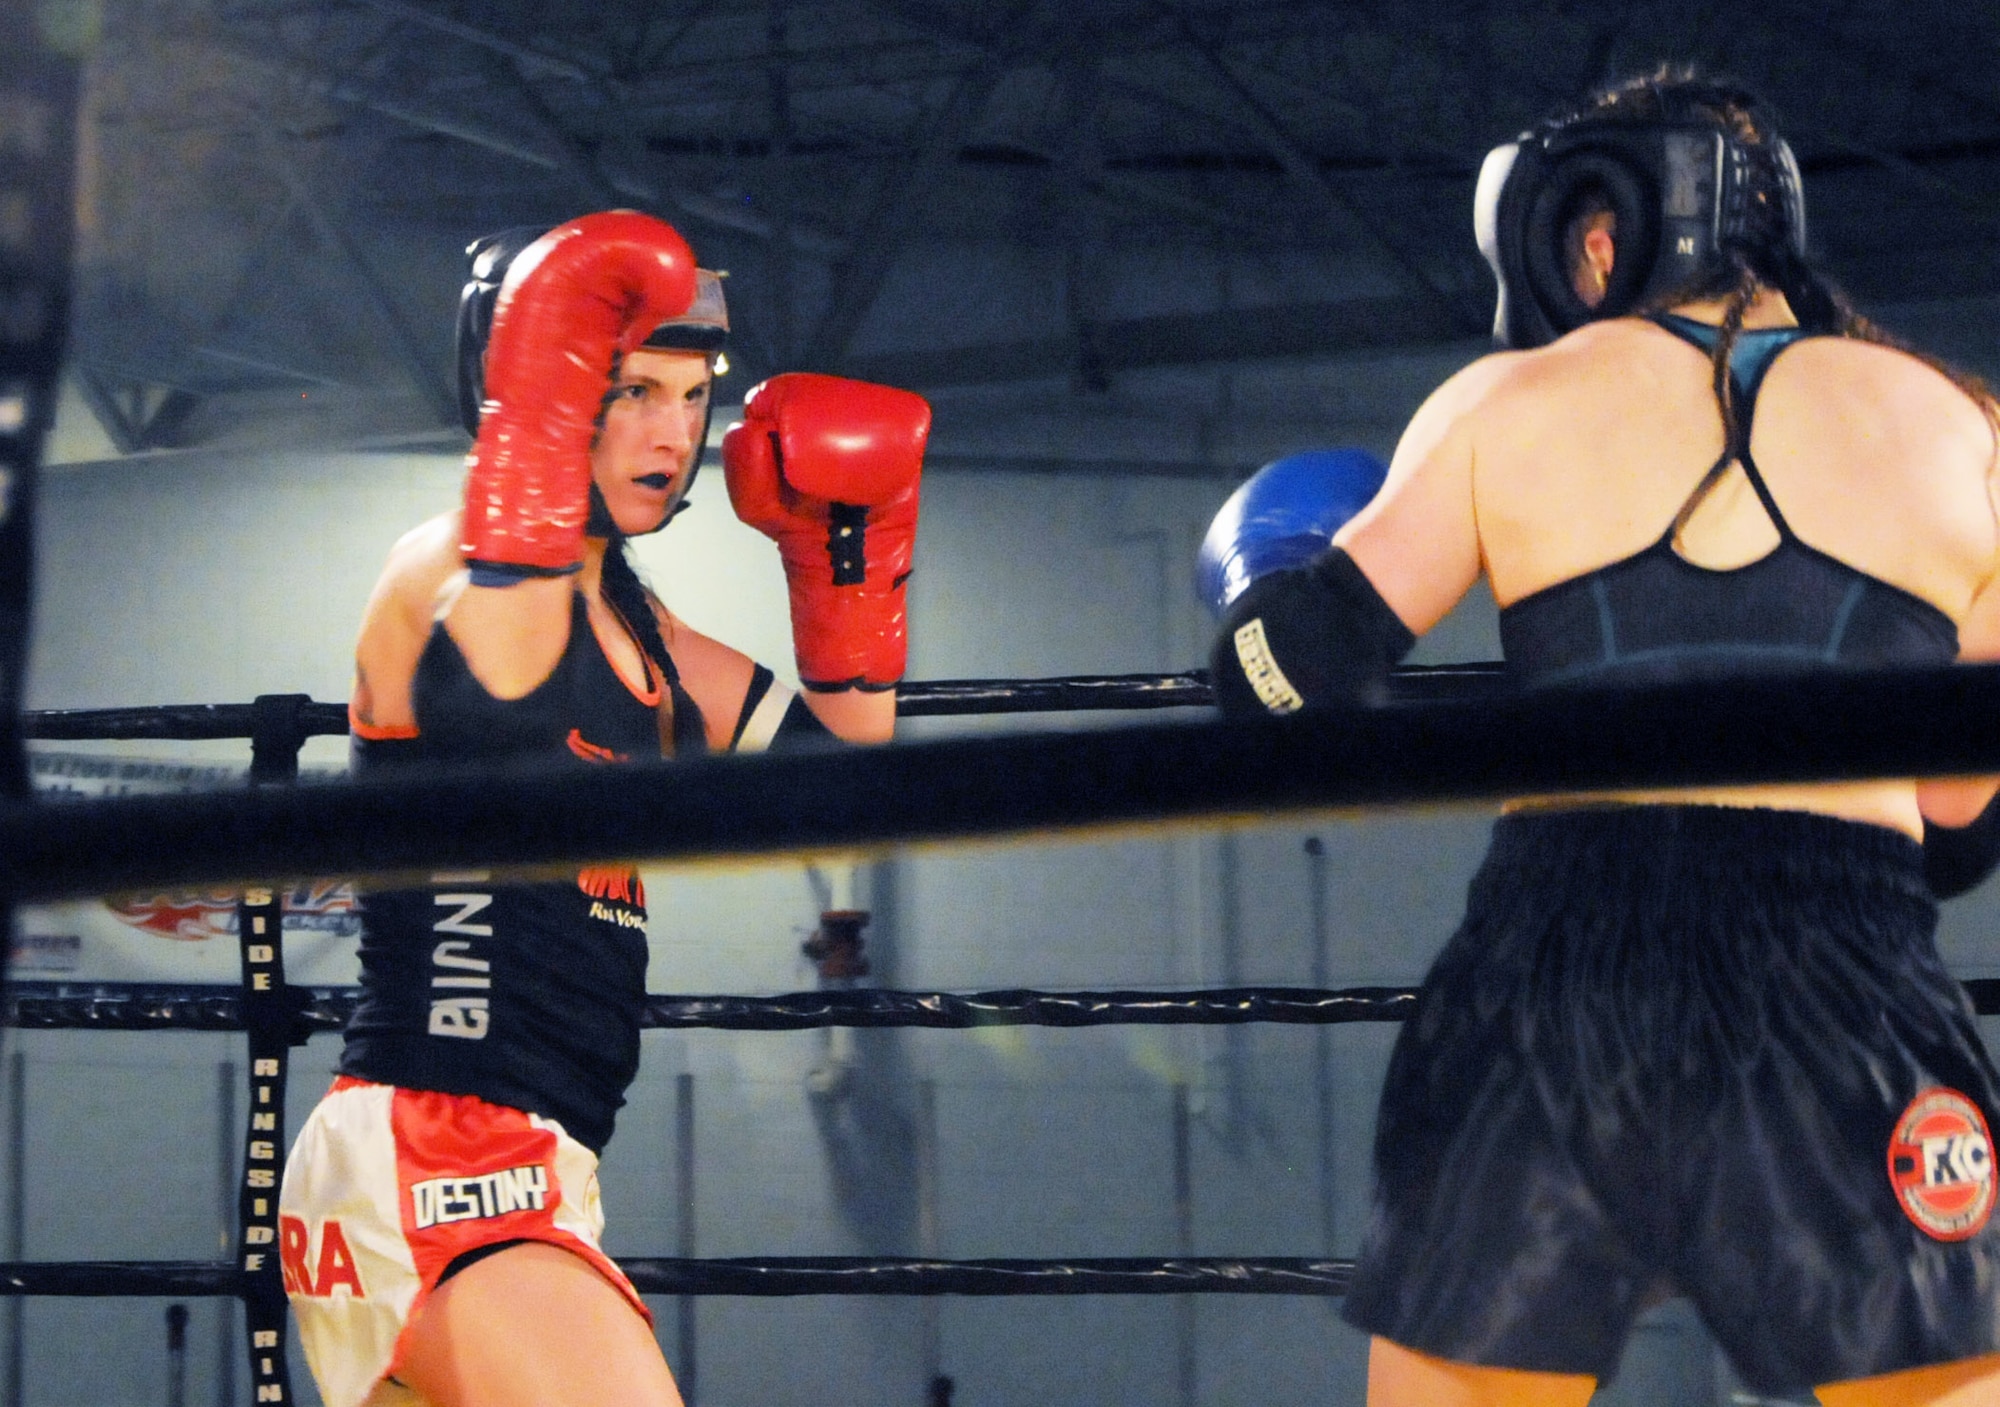 Tech. Sgt. Destiny Taylor, 110th Attack Wing Comptroller Flight claimed victory in her third Muay Thai full contact fight, Saturday, March 7, 2015, Wings Stadium, Kalamazoo Mich. Sgt Taylor has been practicing Muay Thai for two years. (Air National Guard photo by Tech. Sgt. Timothy Diephouse/Released)